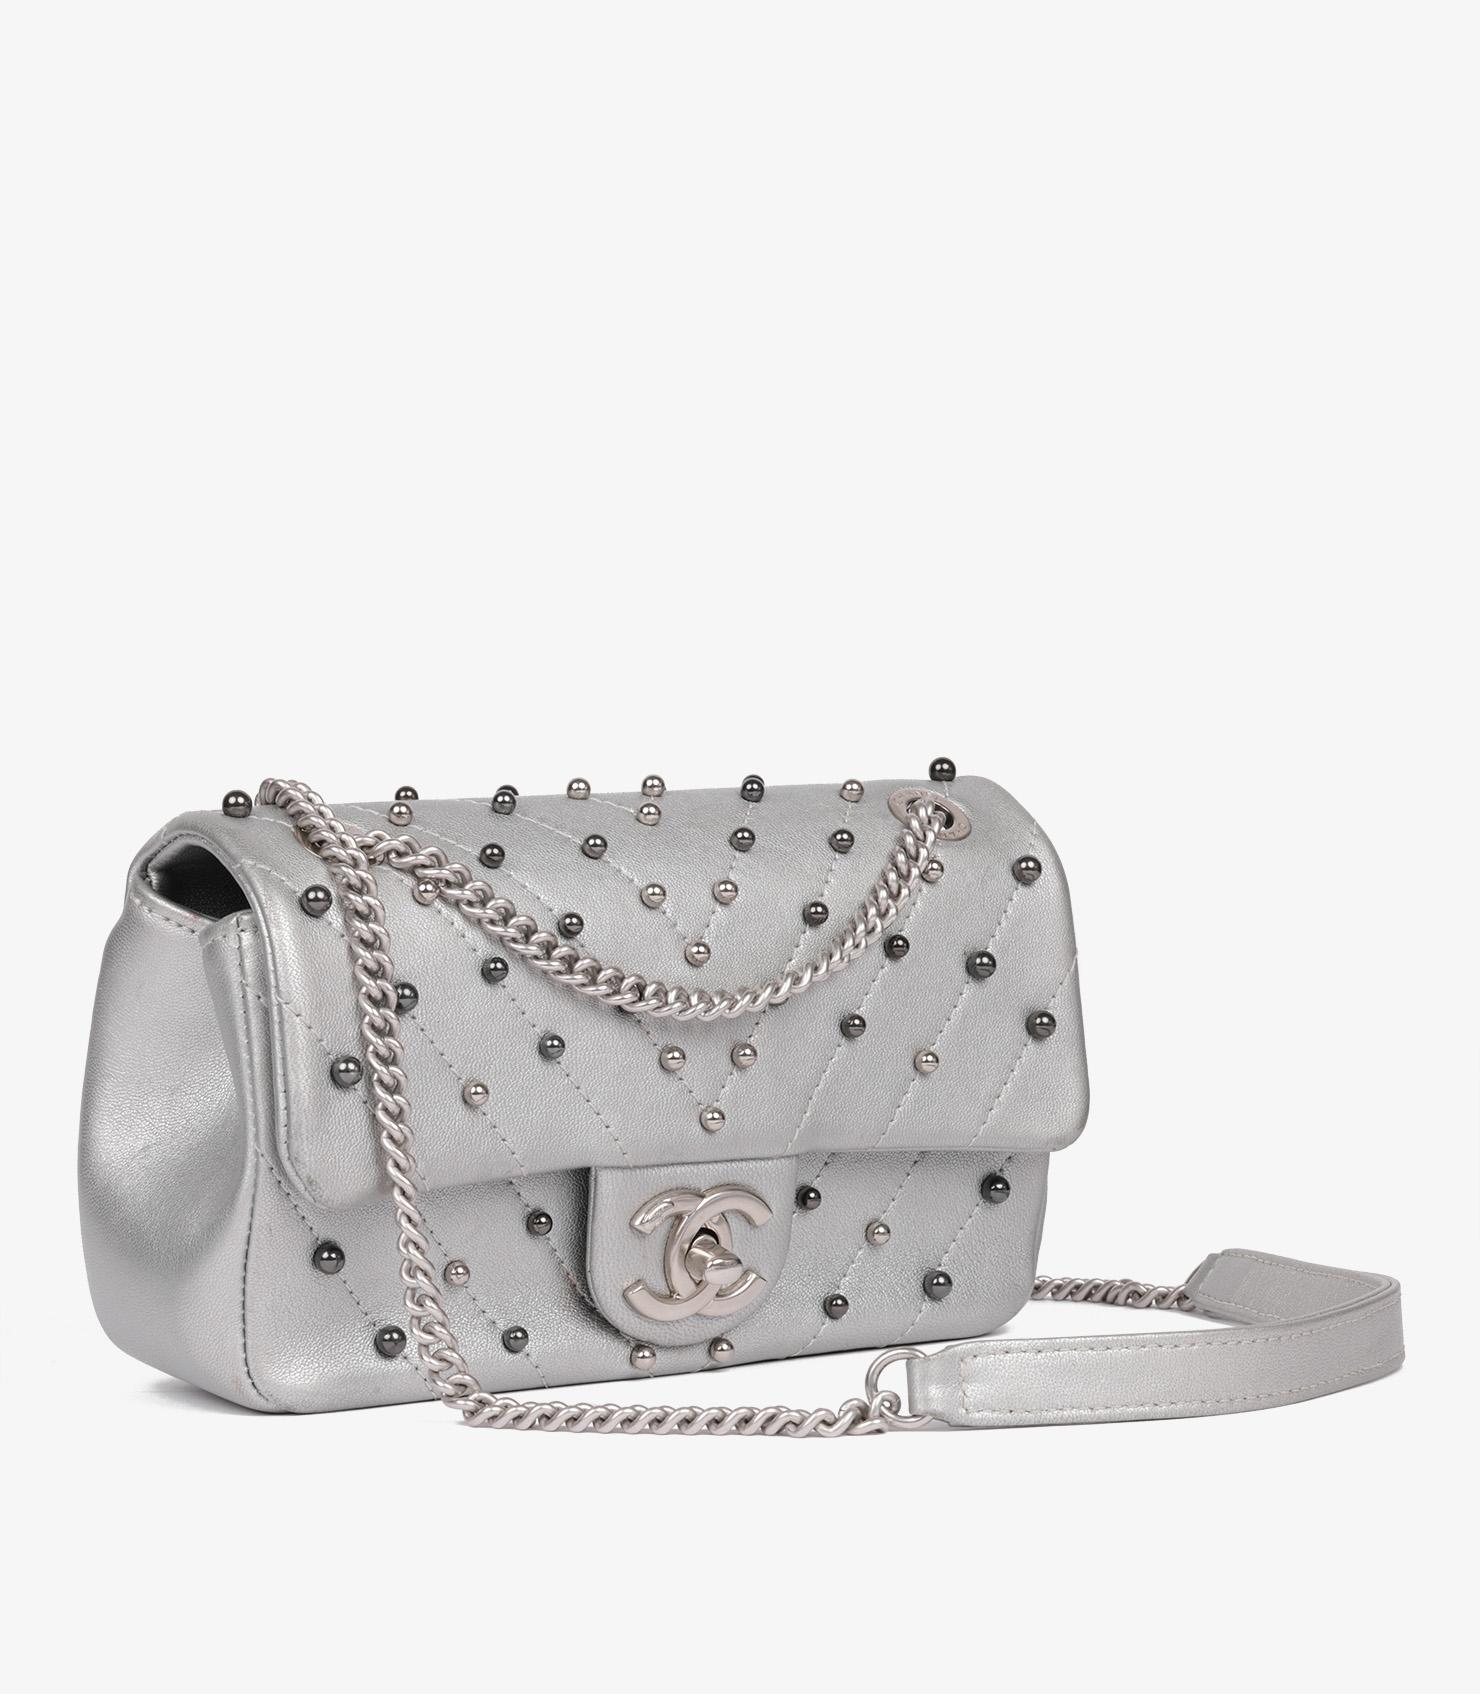 Chanel Silver Chevron Quilted Lambskin Stud Wars Rectangular Mini Flap Bag In Excellent Condition For Sale In Bishop's Stortford, Hertfordshire